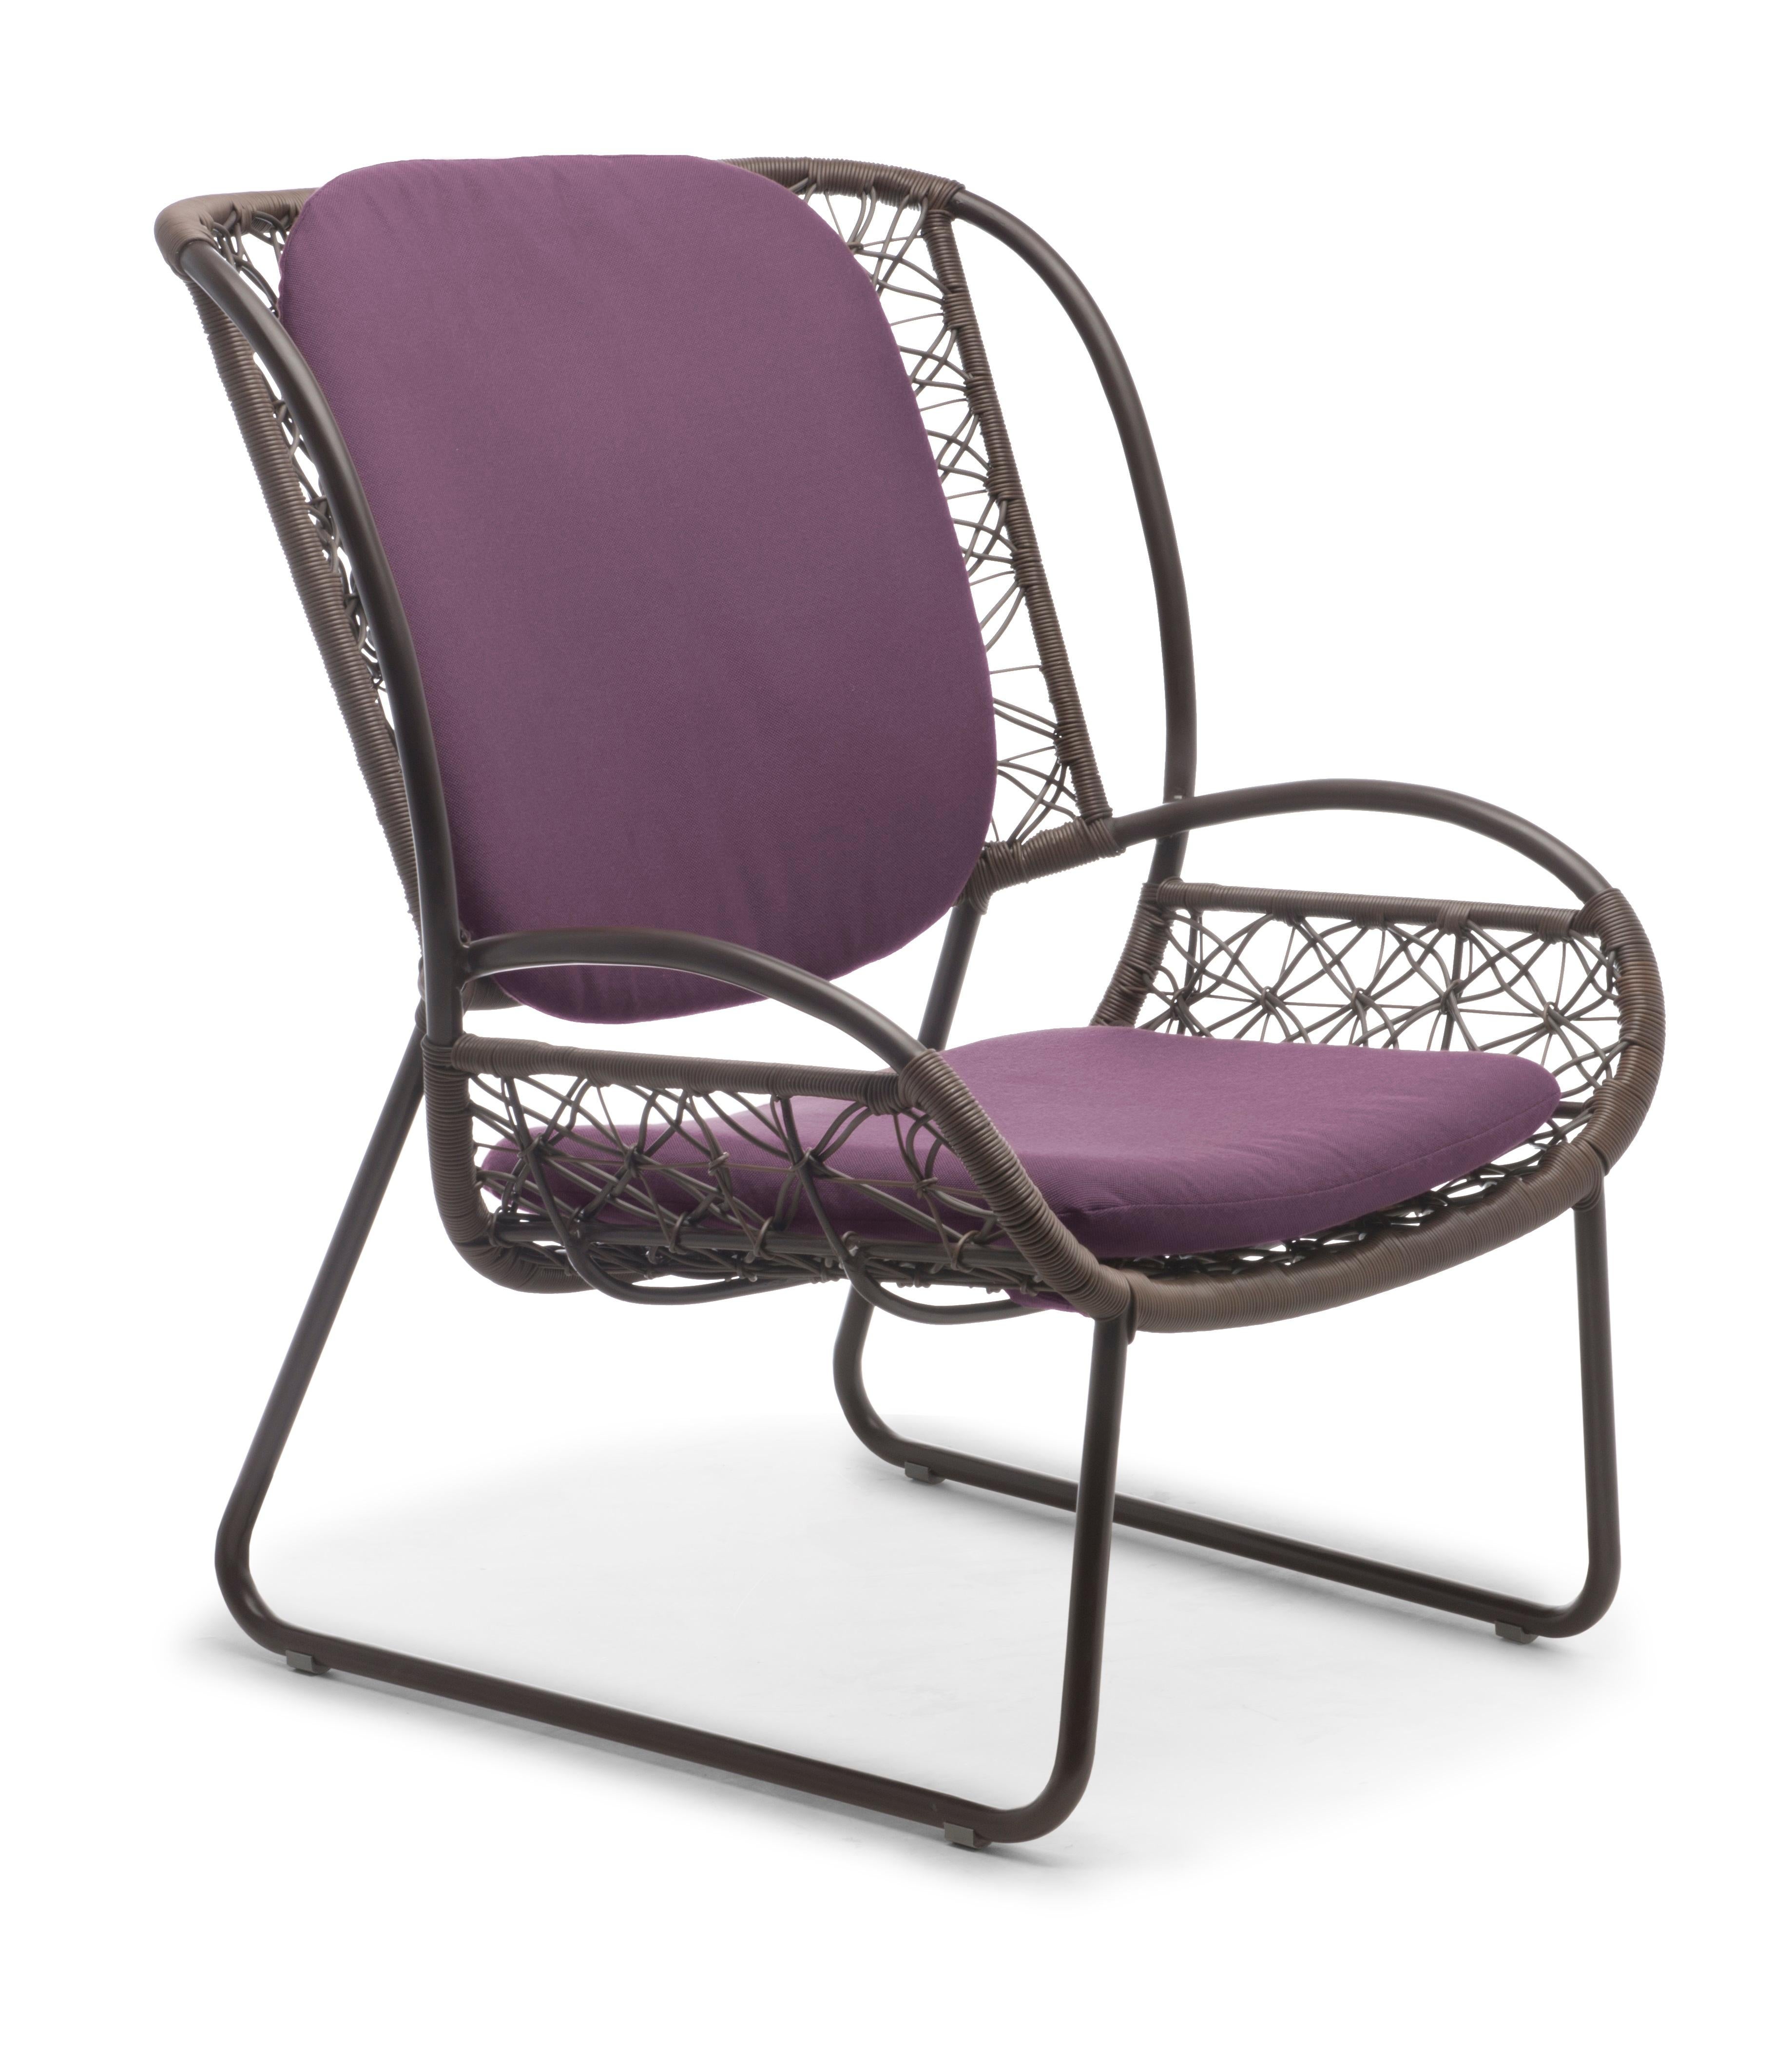 Easy armchair by Kenneth Cobonpue
Materials: Polyethylene. Aluminum. 
Dimensions: 75 x 81 x H 98 cm

The boldly colored frame and geometric weave pattern of the Adesso ottoman and chairs bring to mind a summer field of flowers. Coupled with a